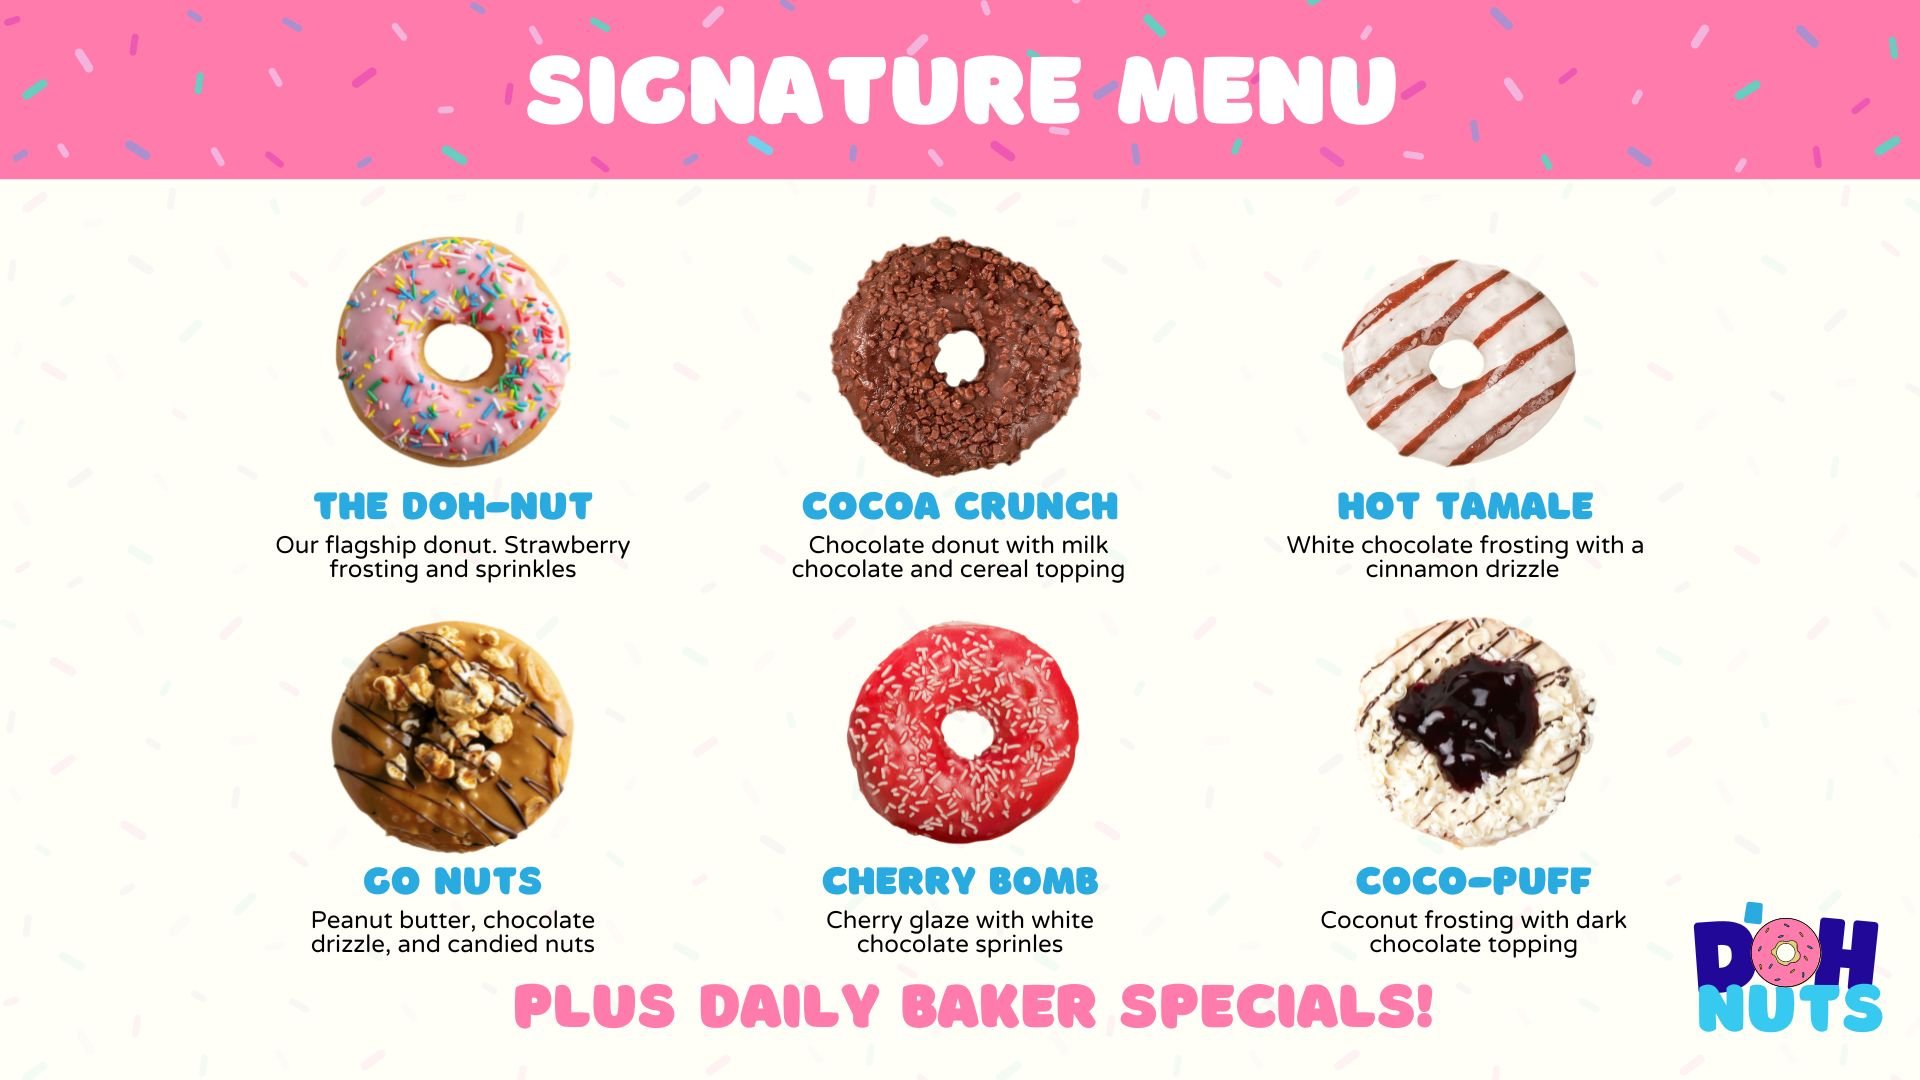 Features Section of Pitch Deck: DohNuts Product Photo Grid